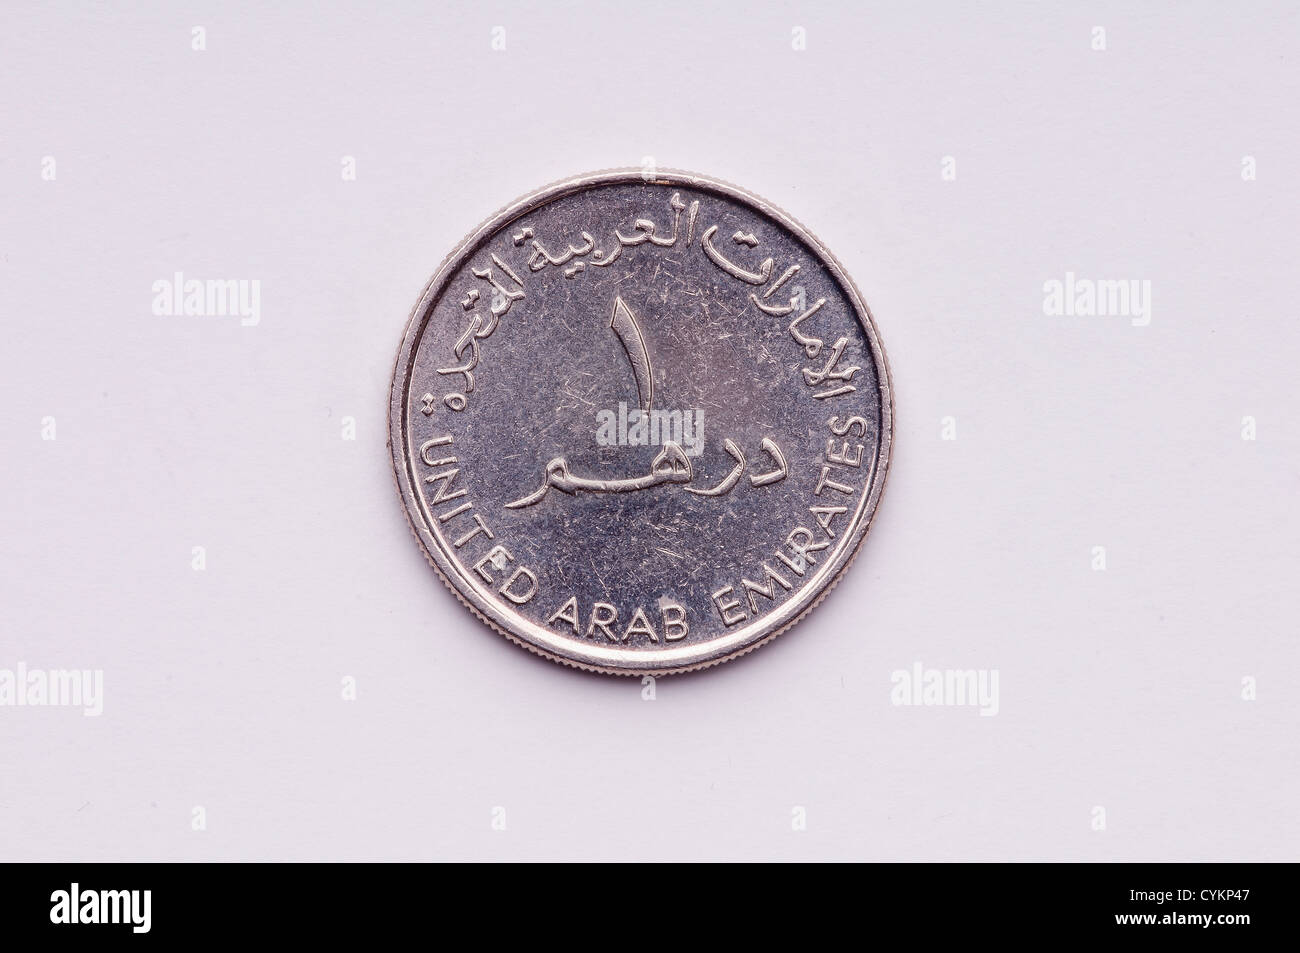 BOTH DATING 1995 2 COINS from the UNITED ARAB EMIRATES 25 FIL & 1 DIRHAM 